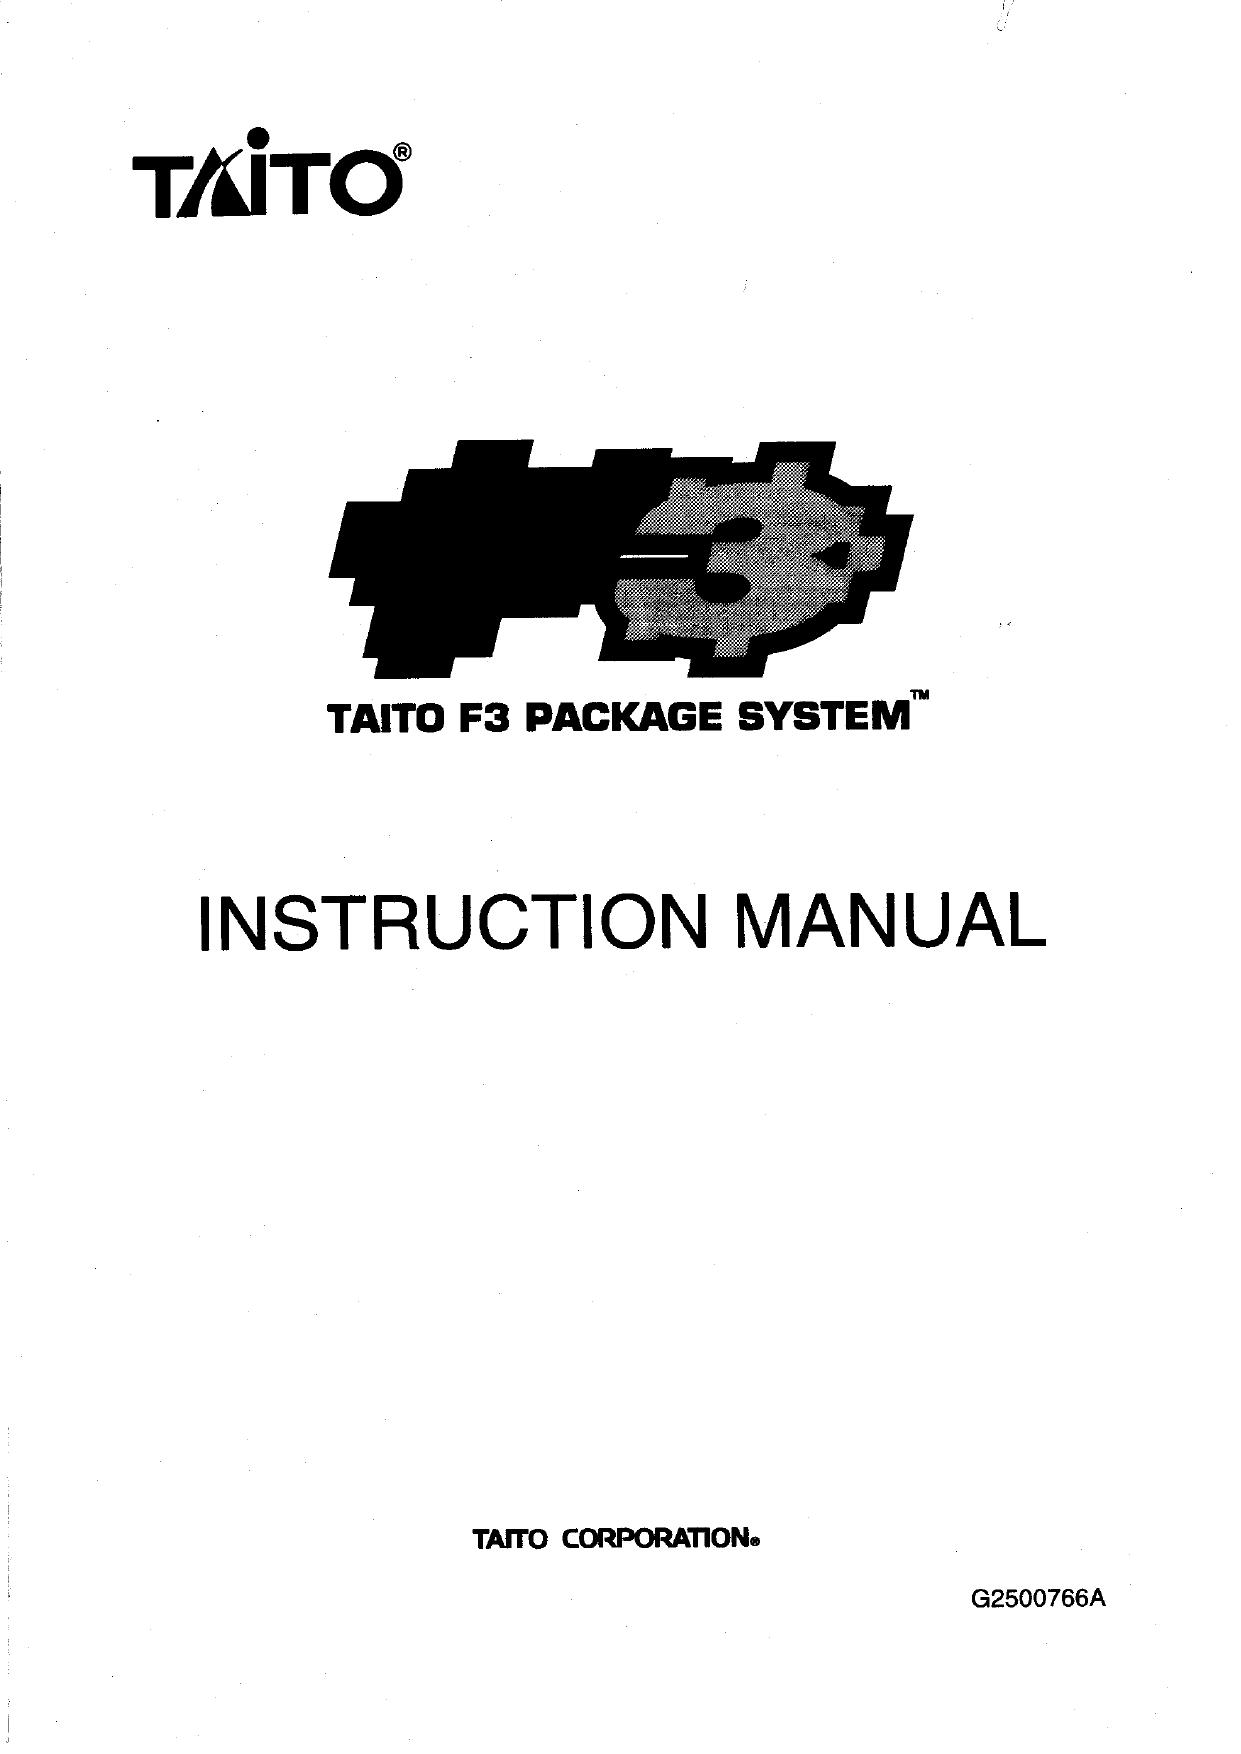 Taito F3 Package System